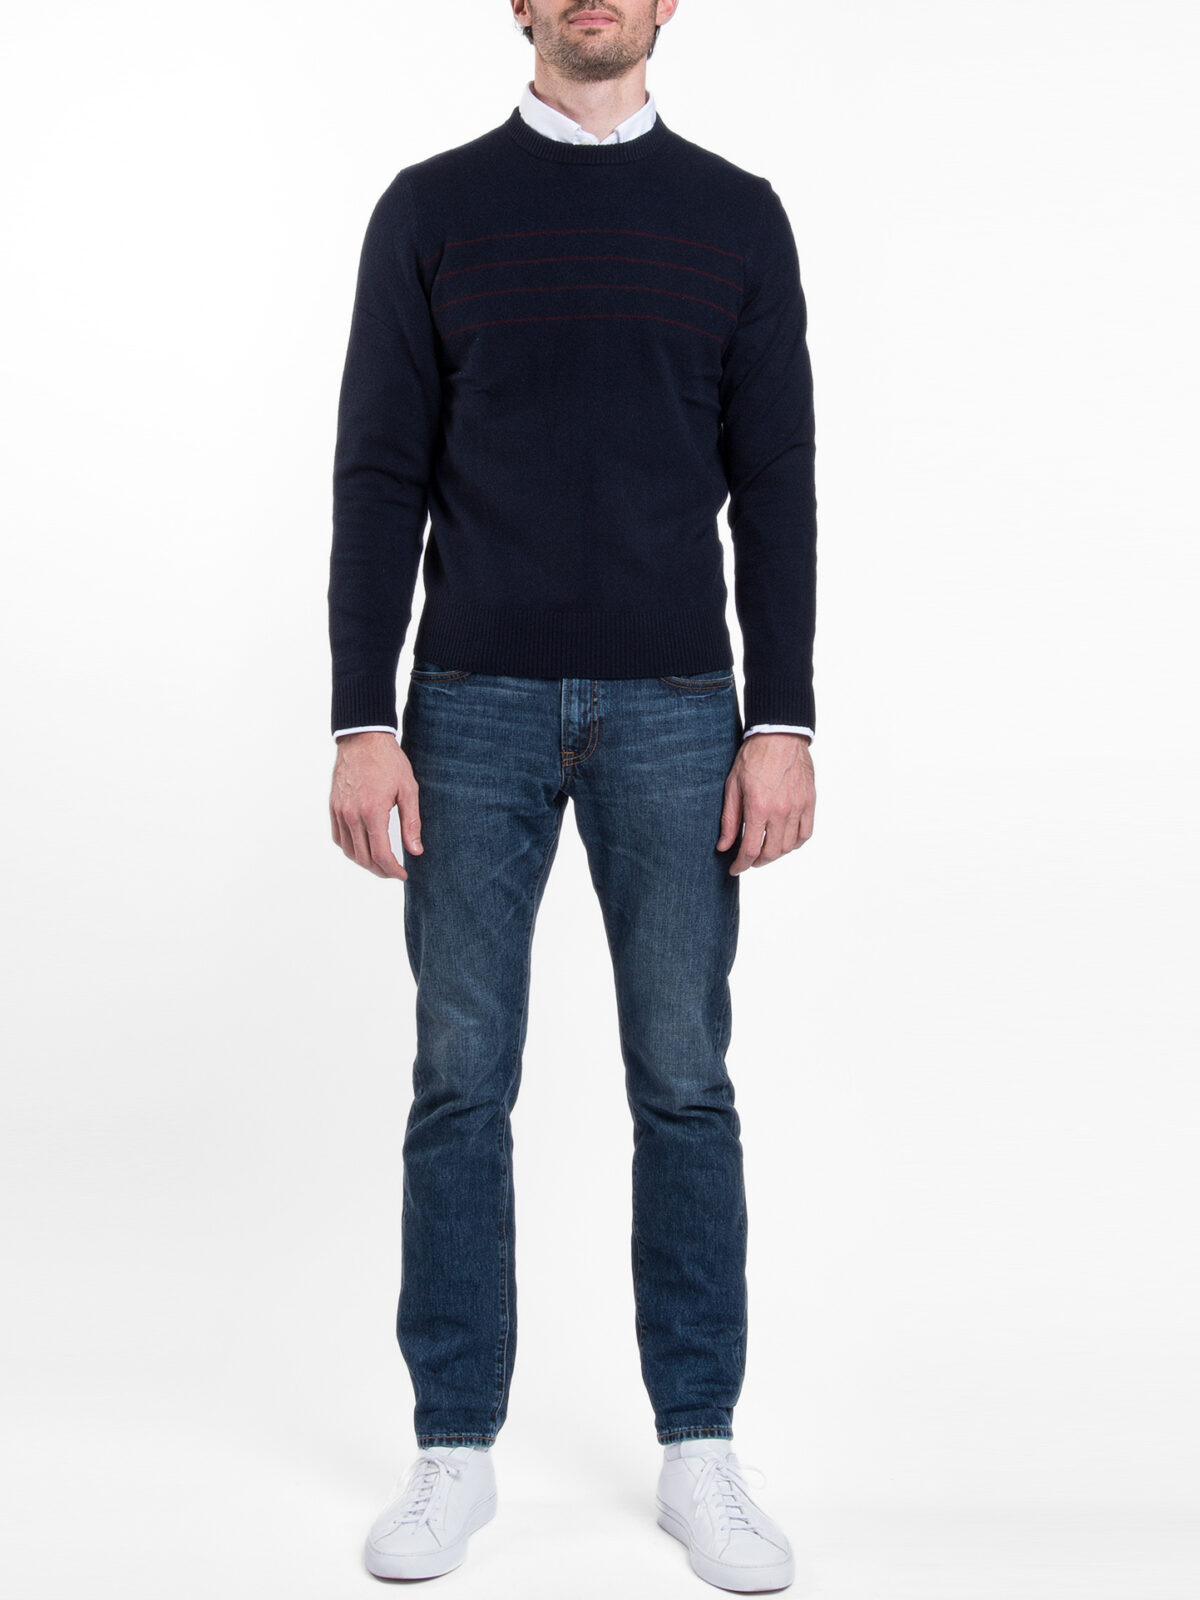 Navy and Red Stripe Cashmere Sweater